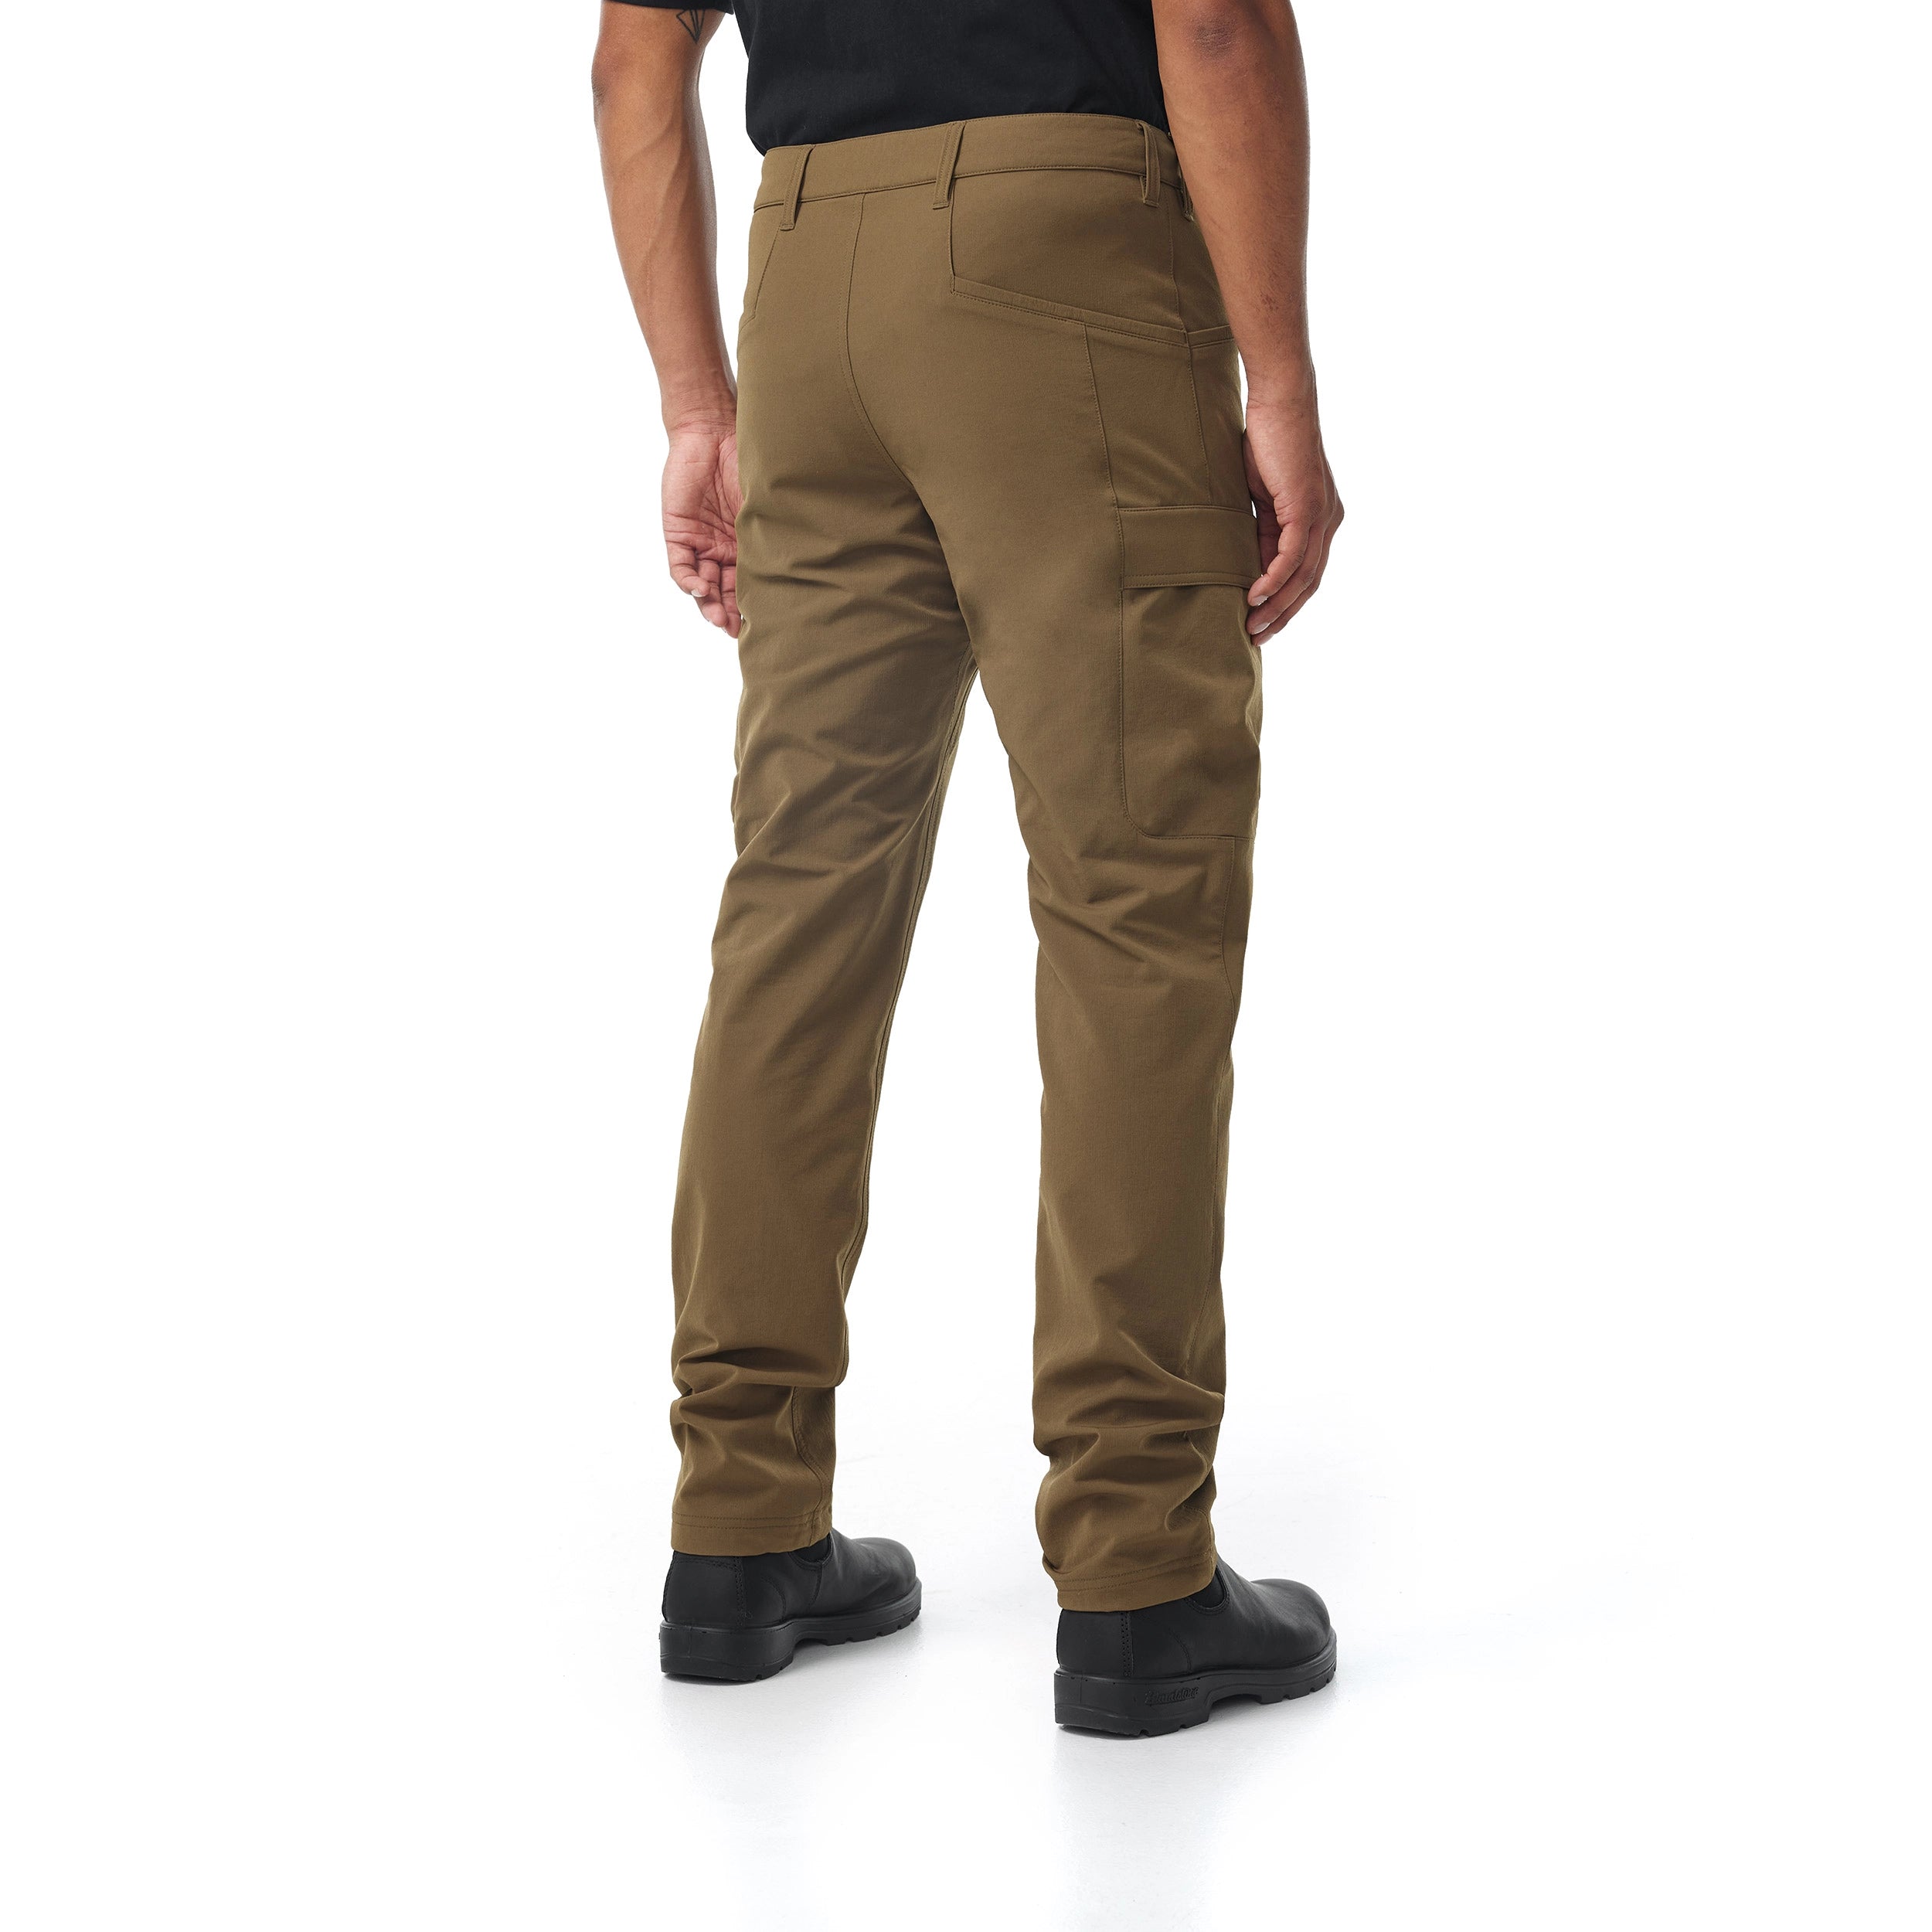 M's Expedition Pants - 32 / Coyote